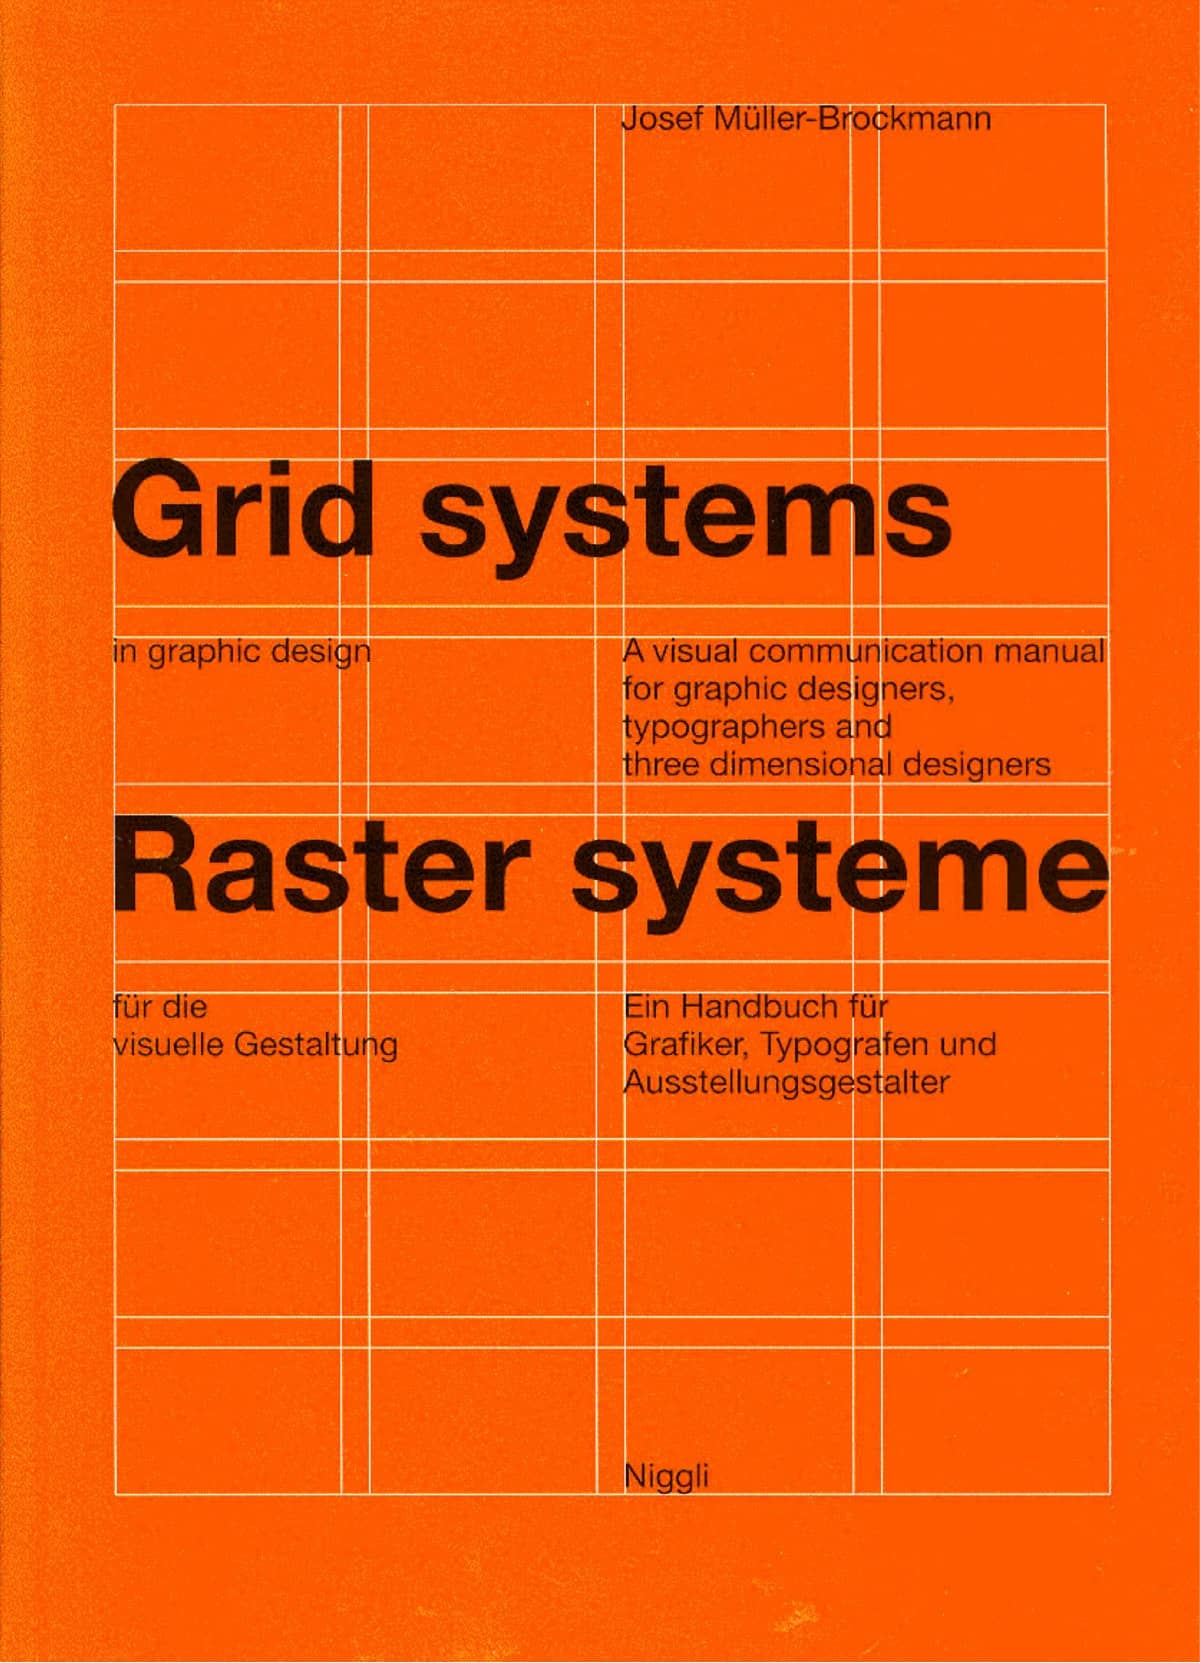 Cover of 'Grid Systems' book